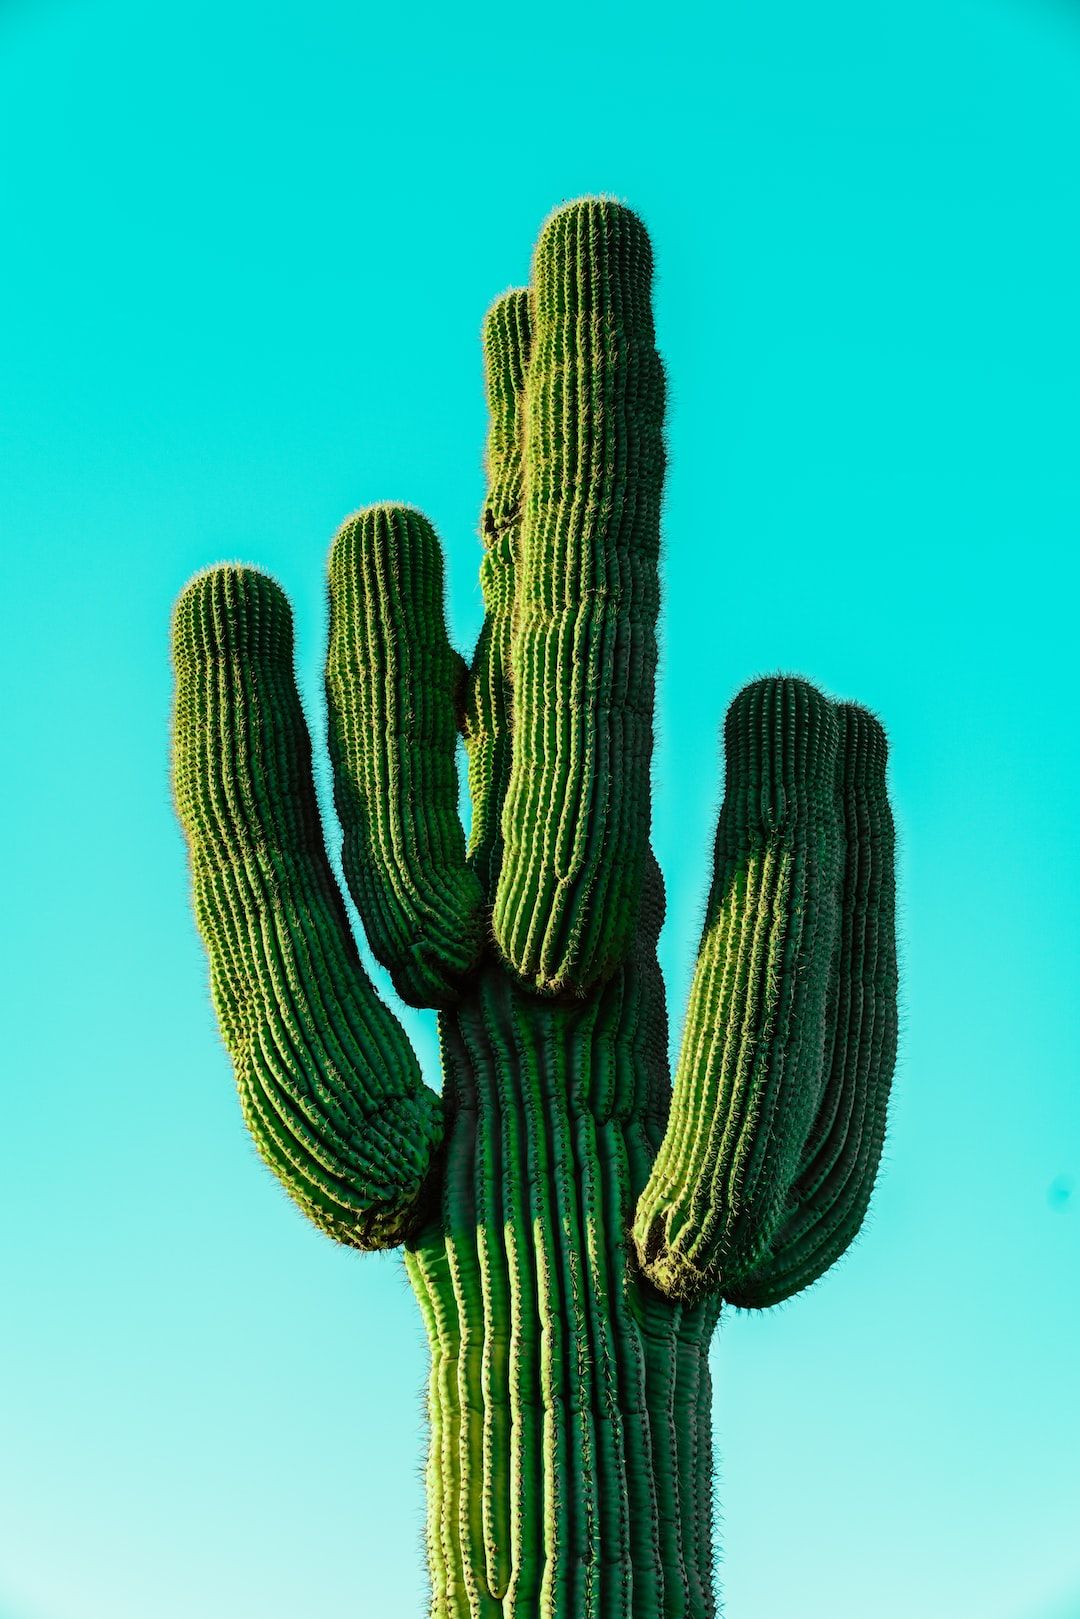 A cactus in front of a blue sky - Cactus